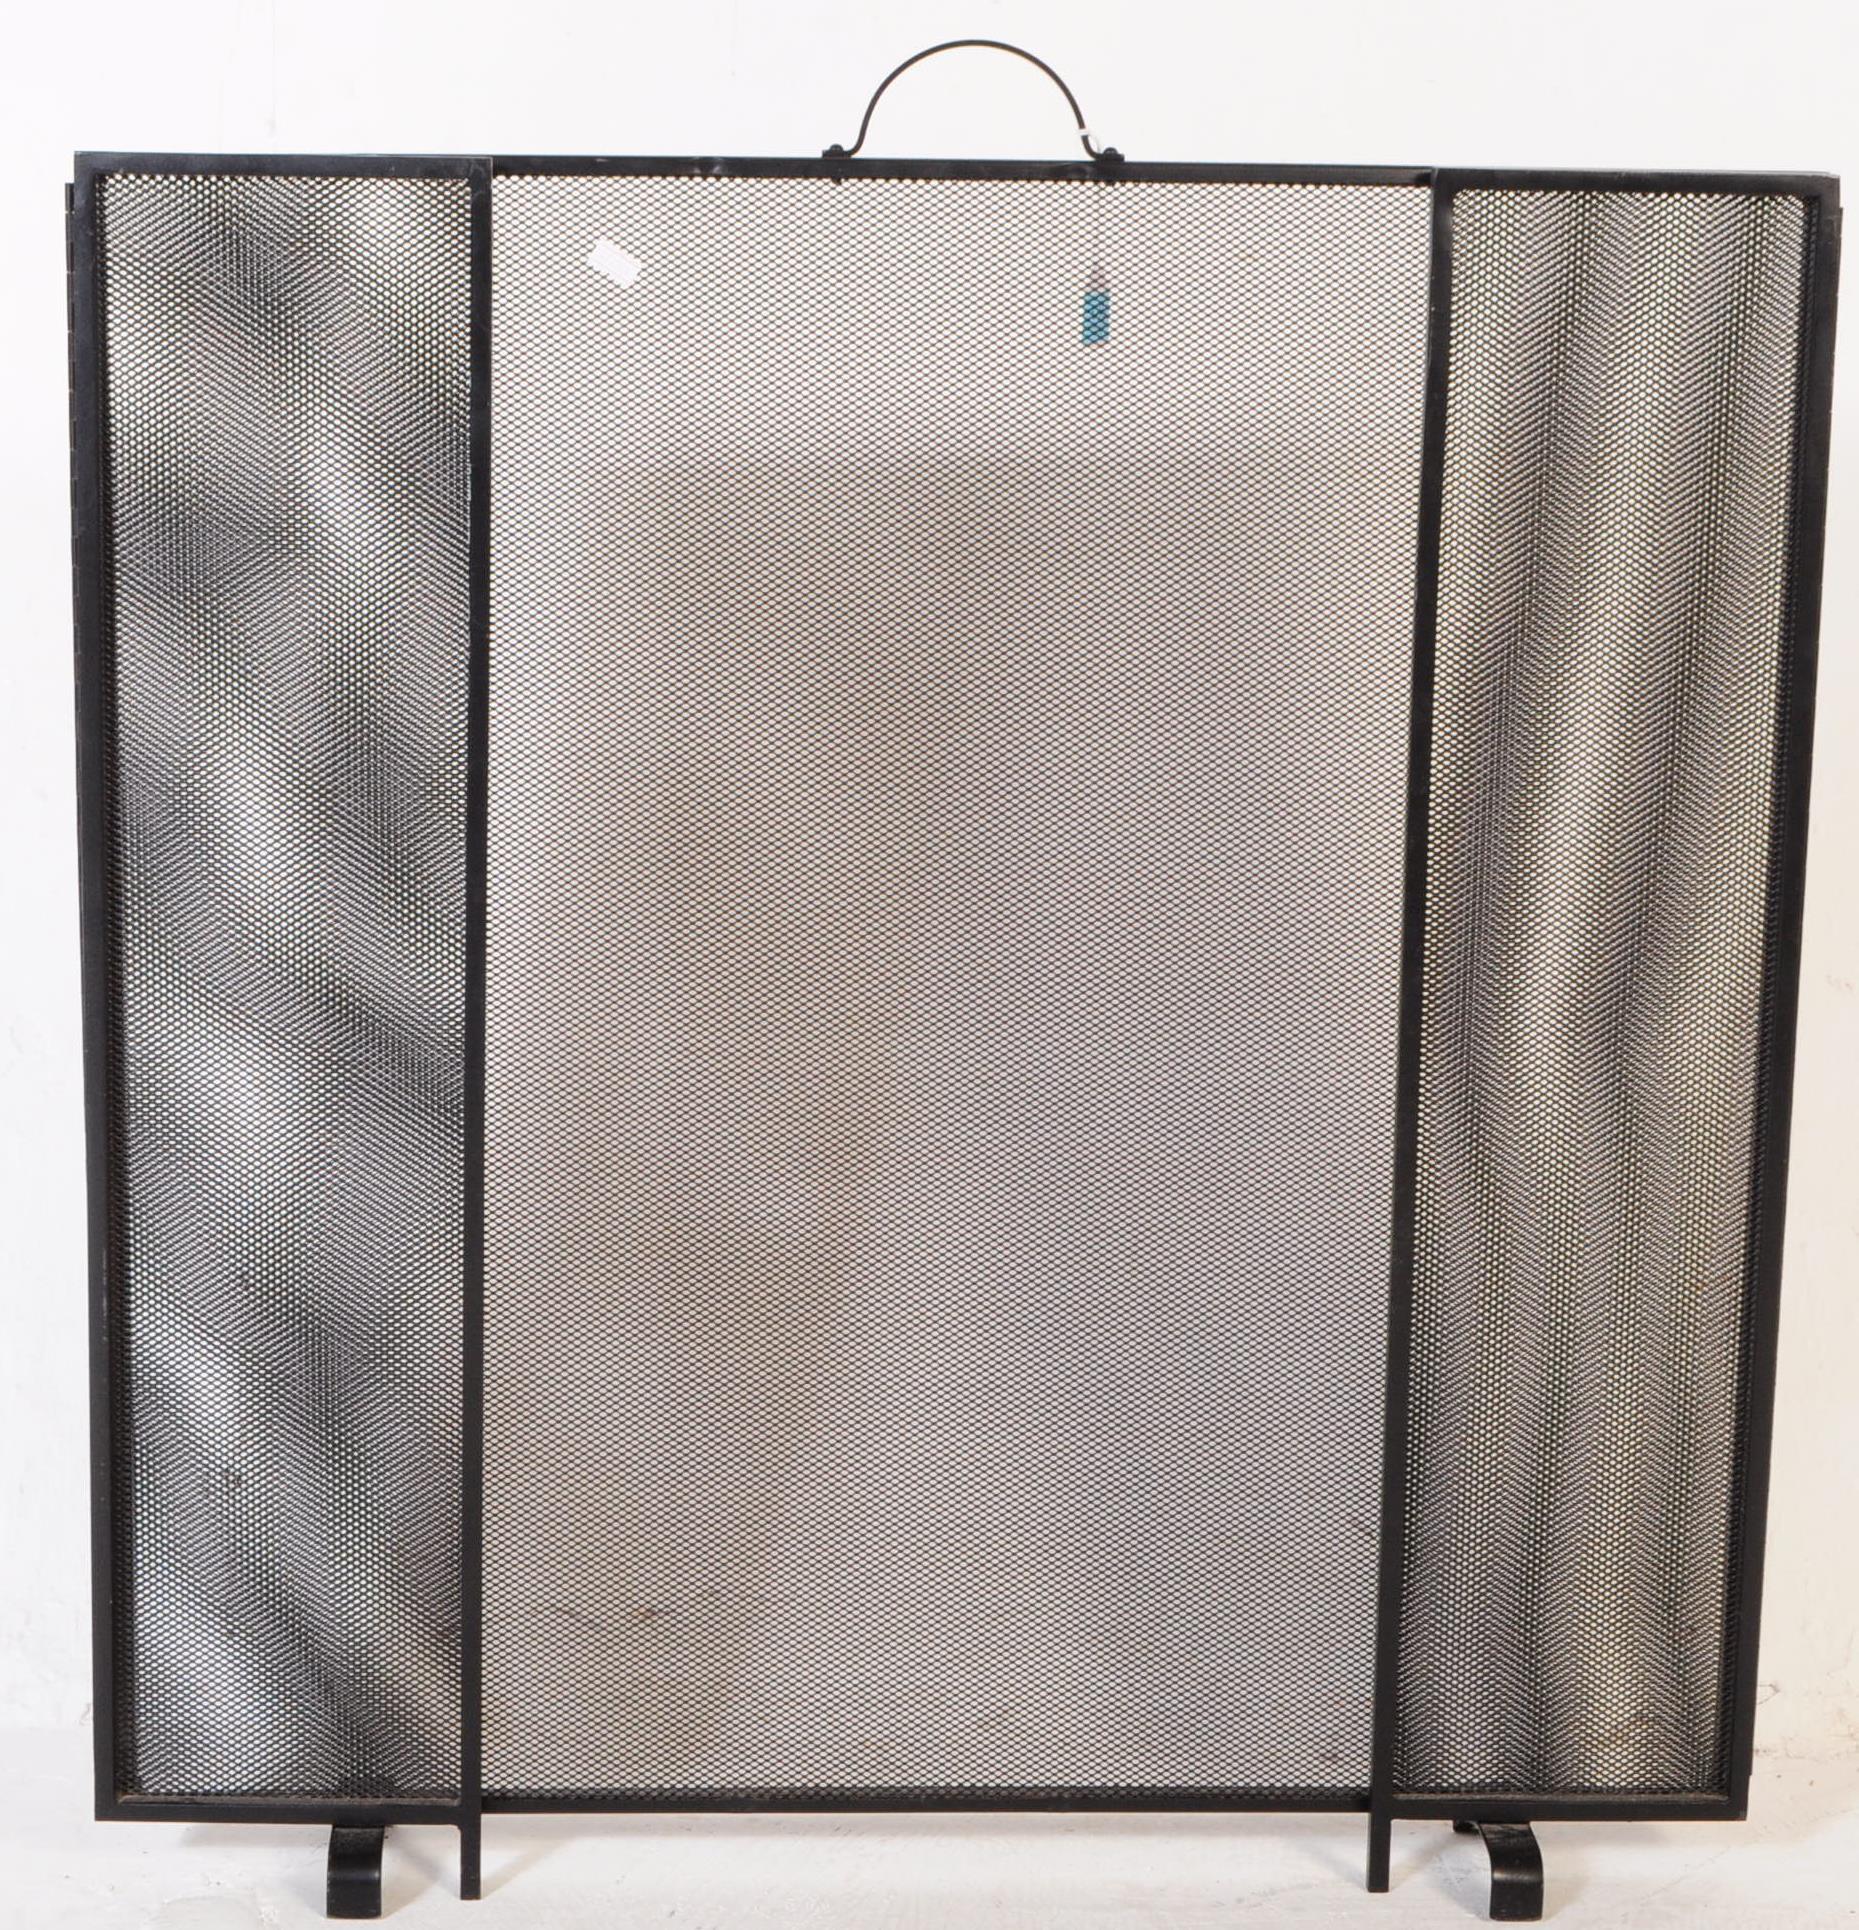 CONTEMPORARY EBONISED METAL FOLDING FIRE SCREEN - Image 2 of 4